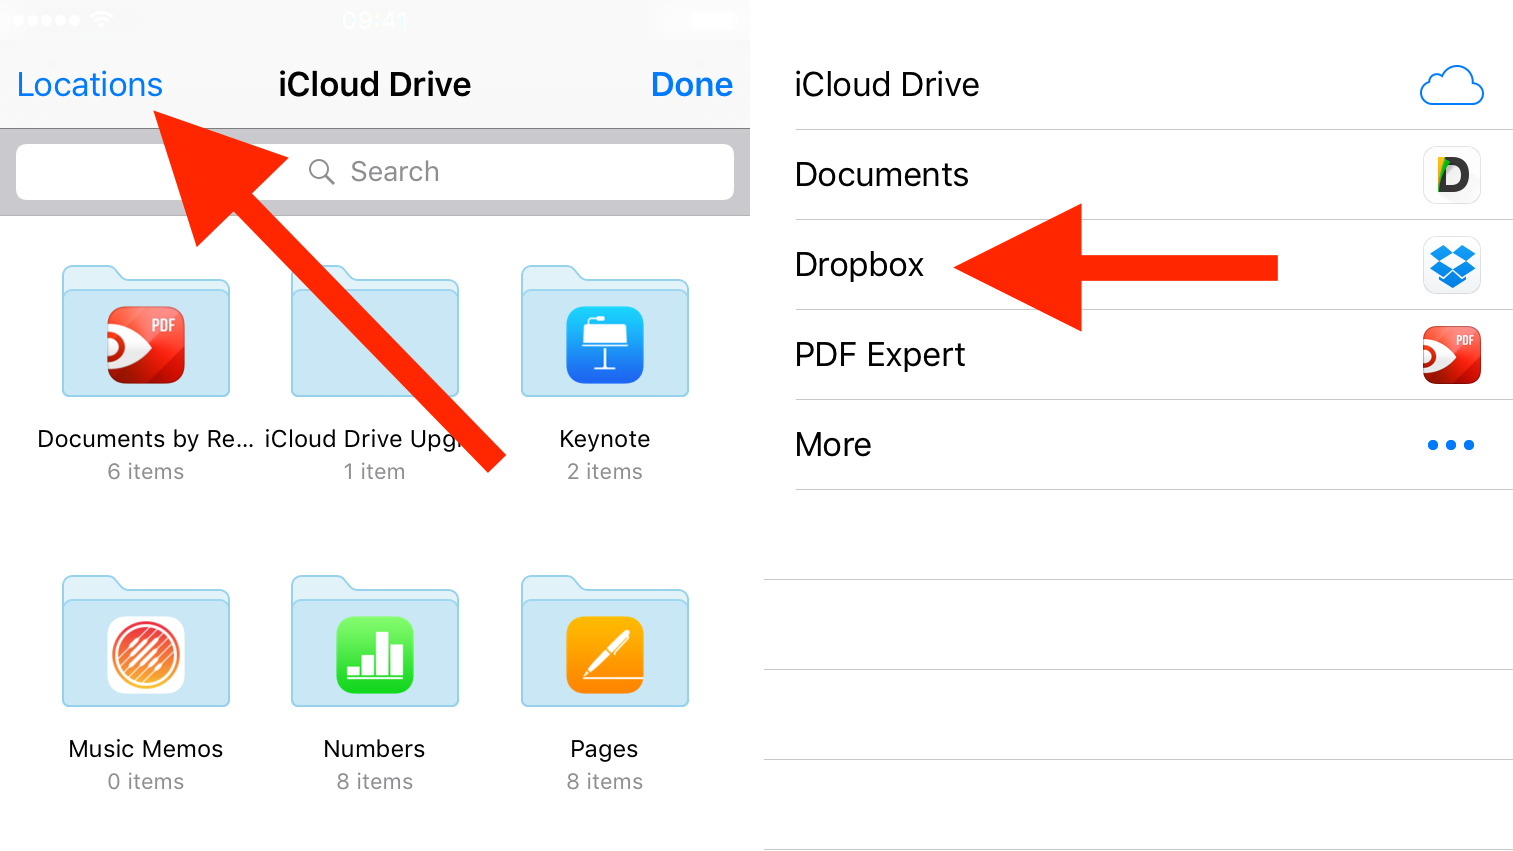 Attach a file to an email from Dropbox